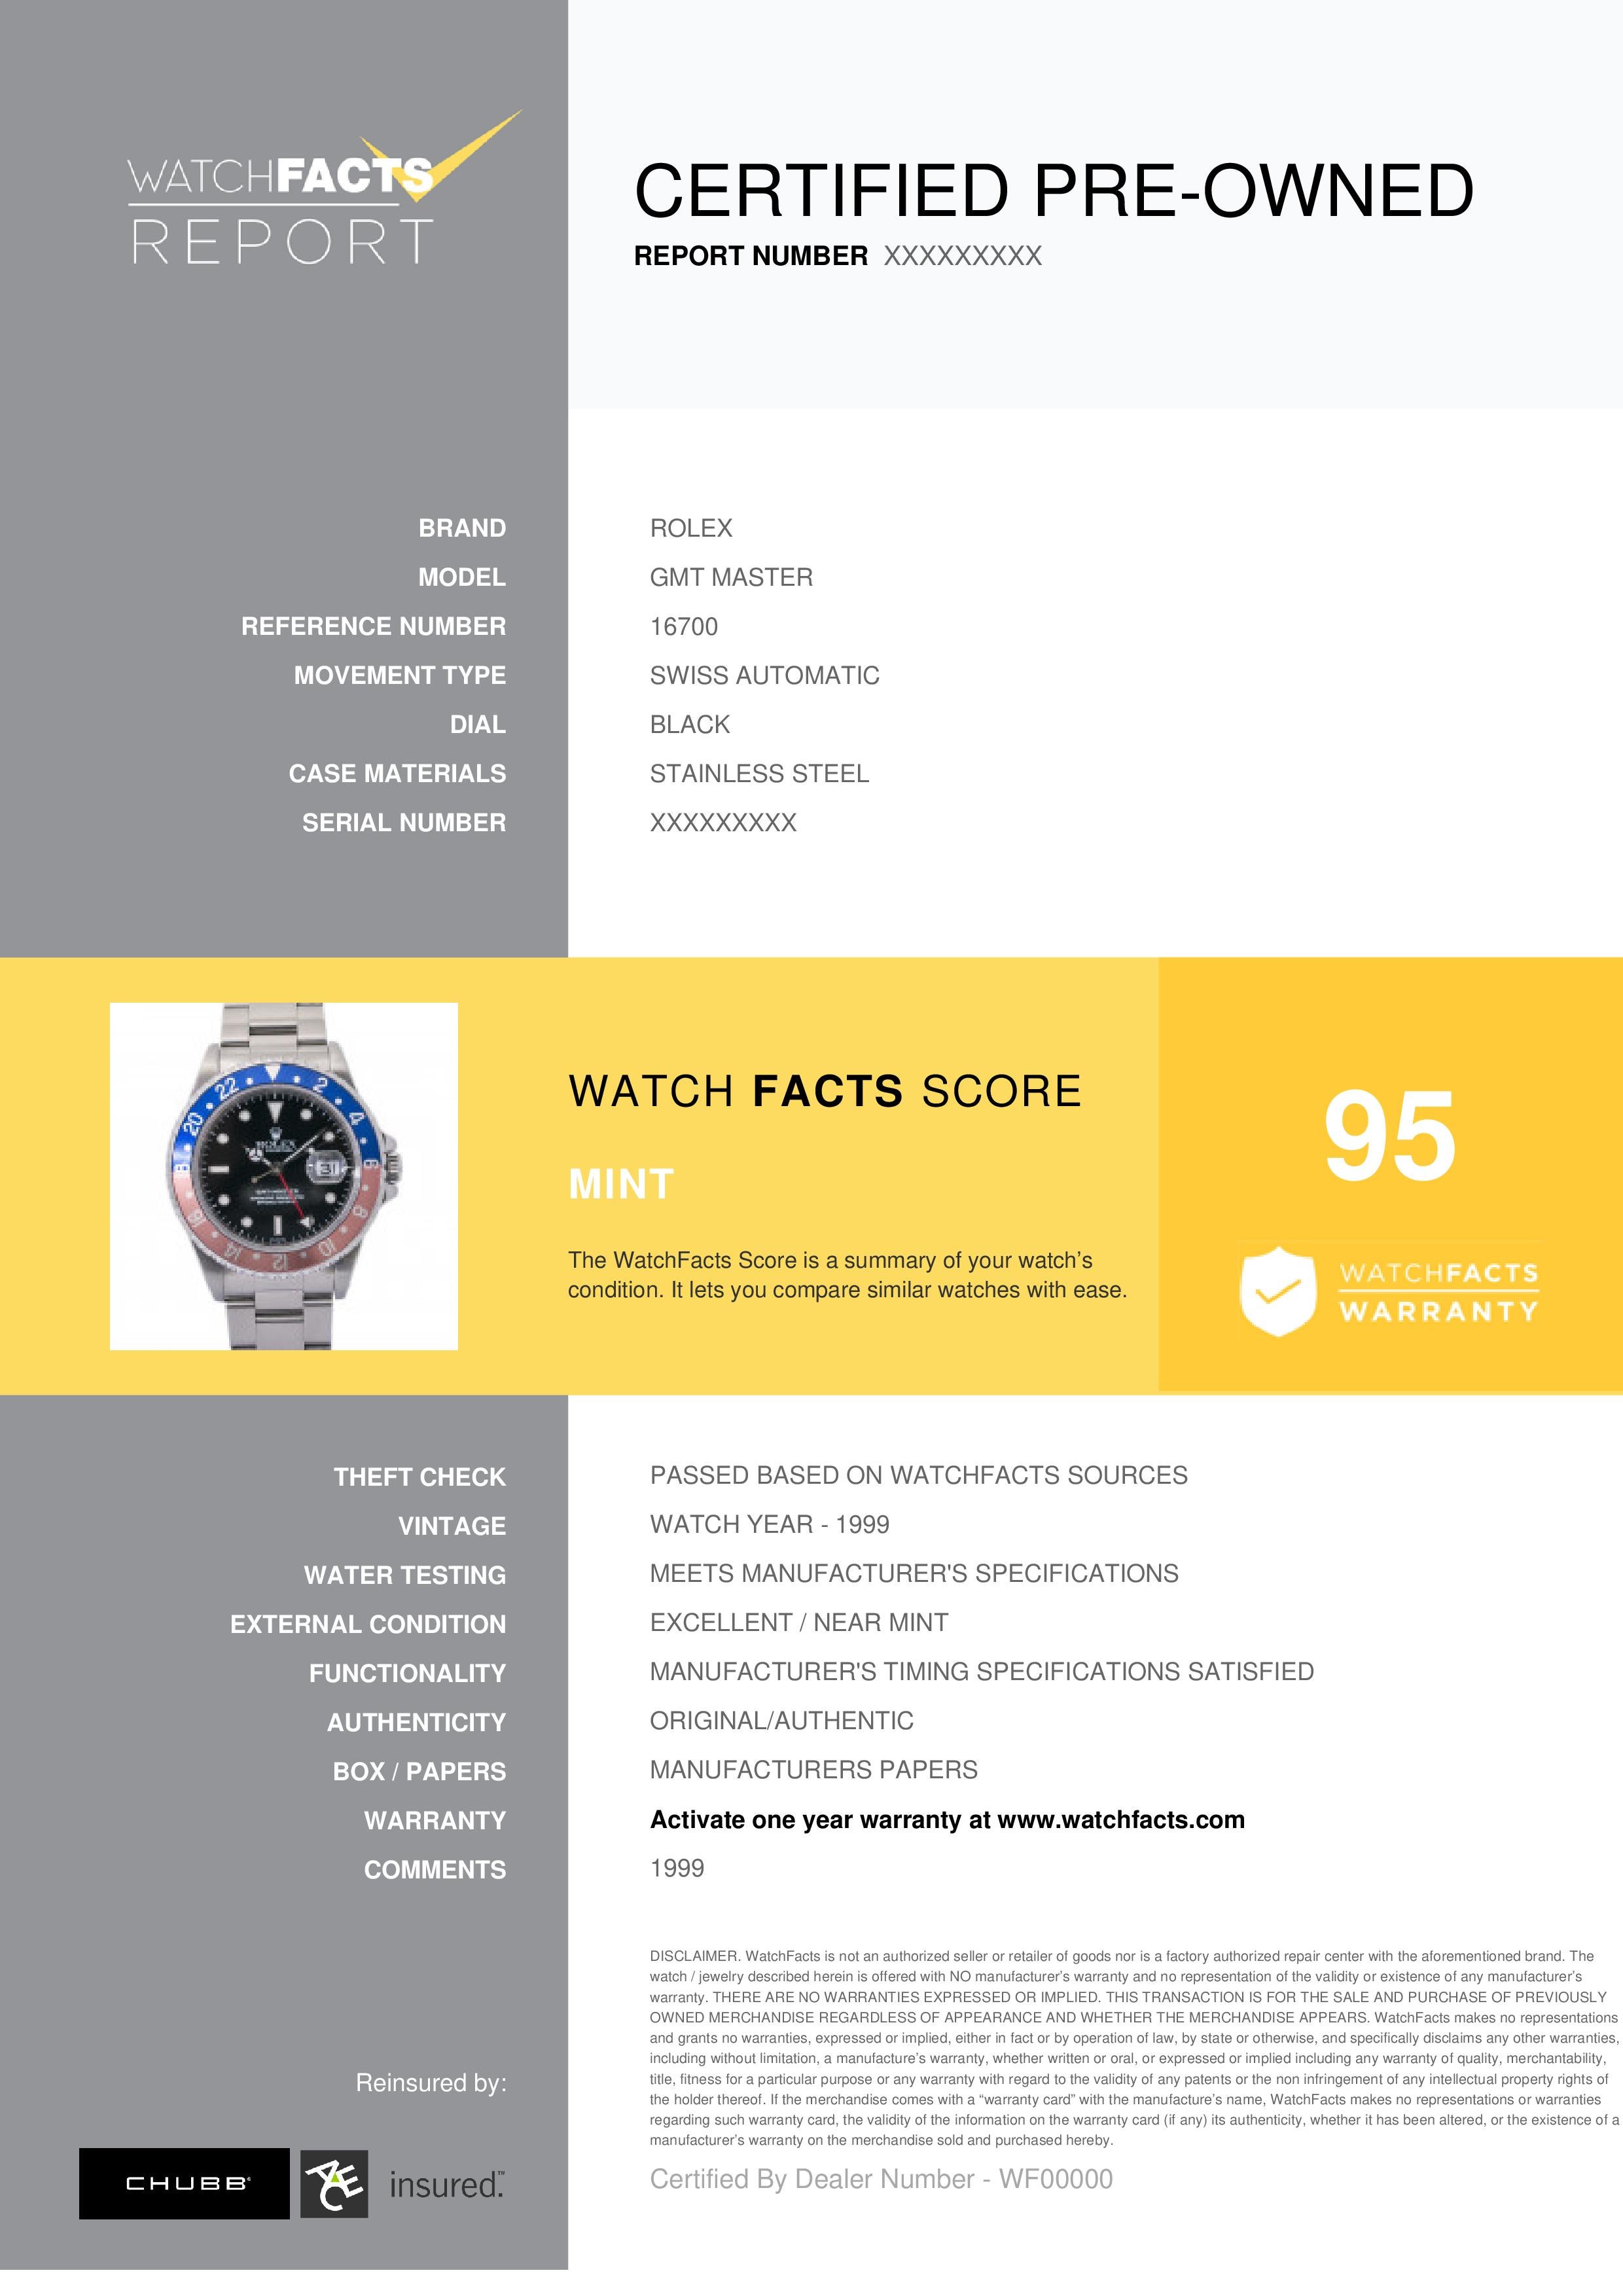 Rolex GMT Master Reference #: 16700. Mens Swiss Automatic Watch Stainless Steel Black 40 MM. Verified and Certified by WatchFacts. 1 year warranty offered by WatchFacts.
